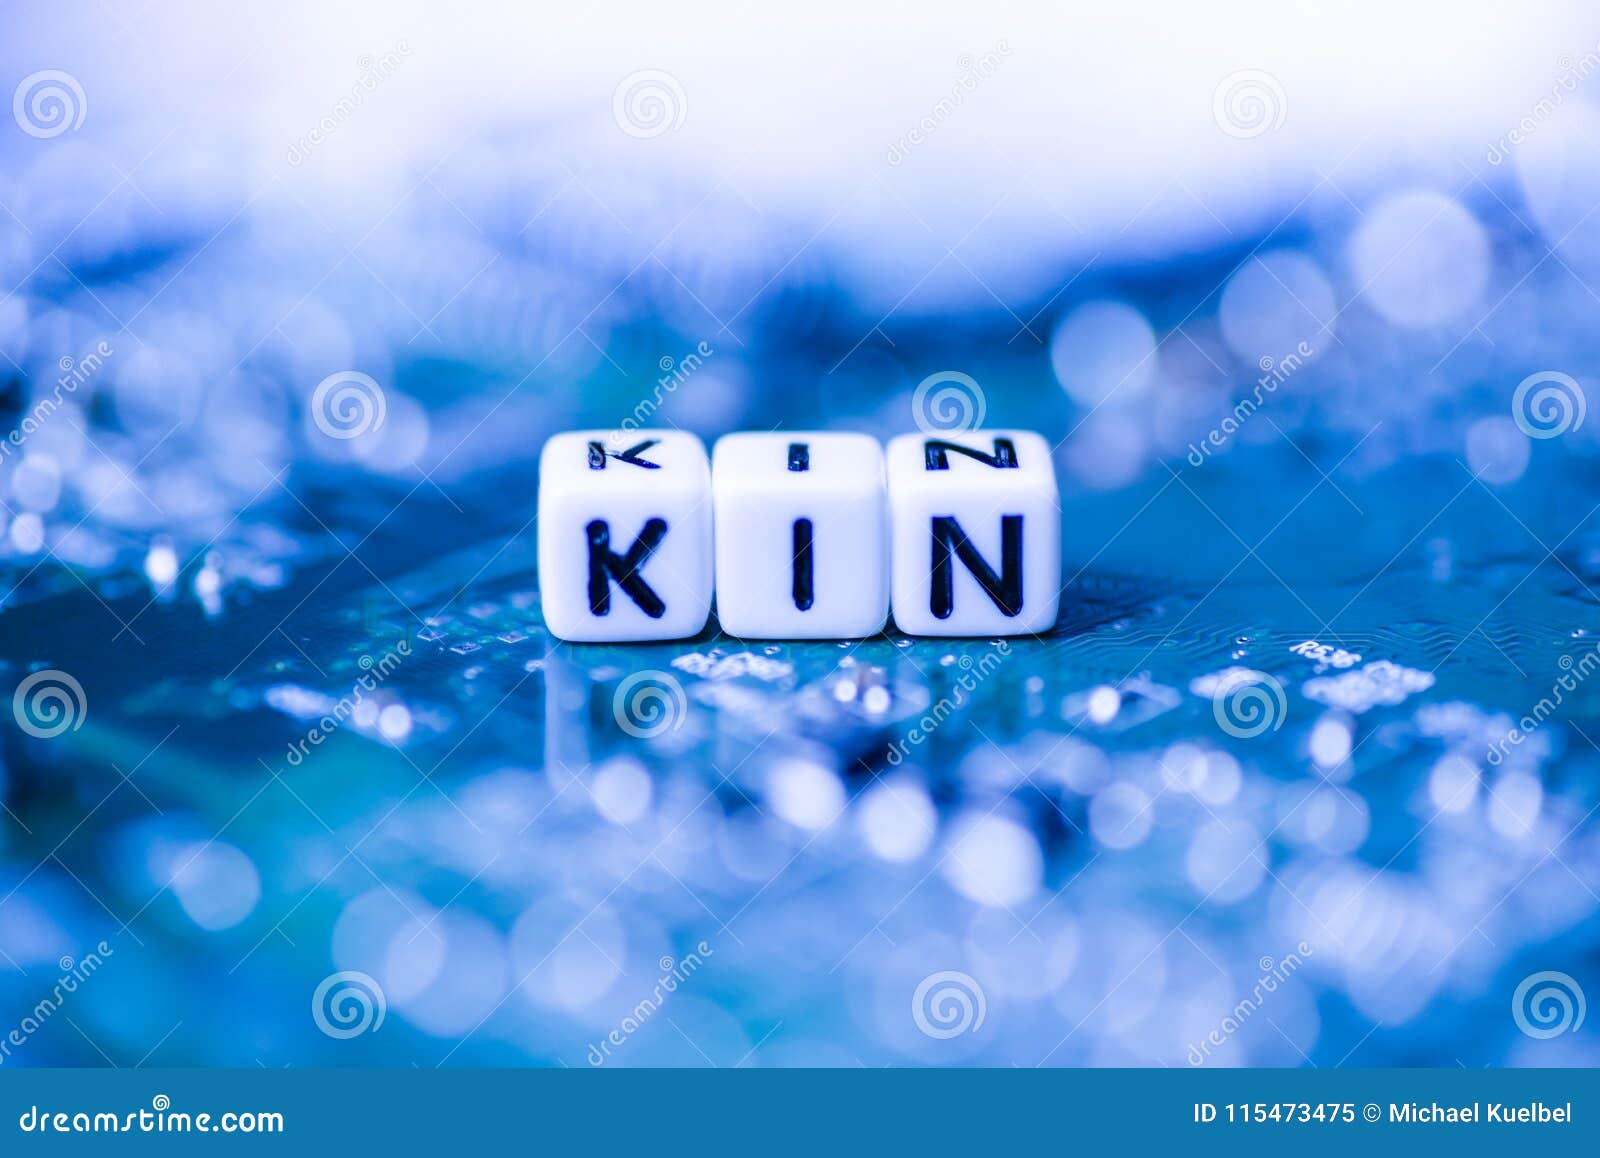 kin cryptocurrency graphics